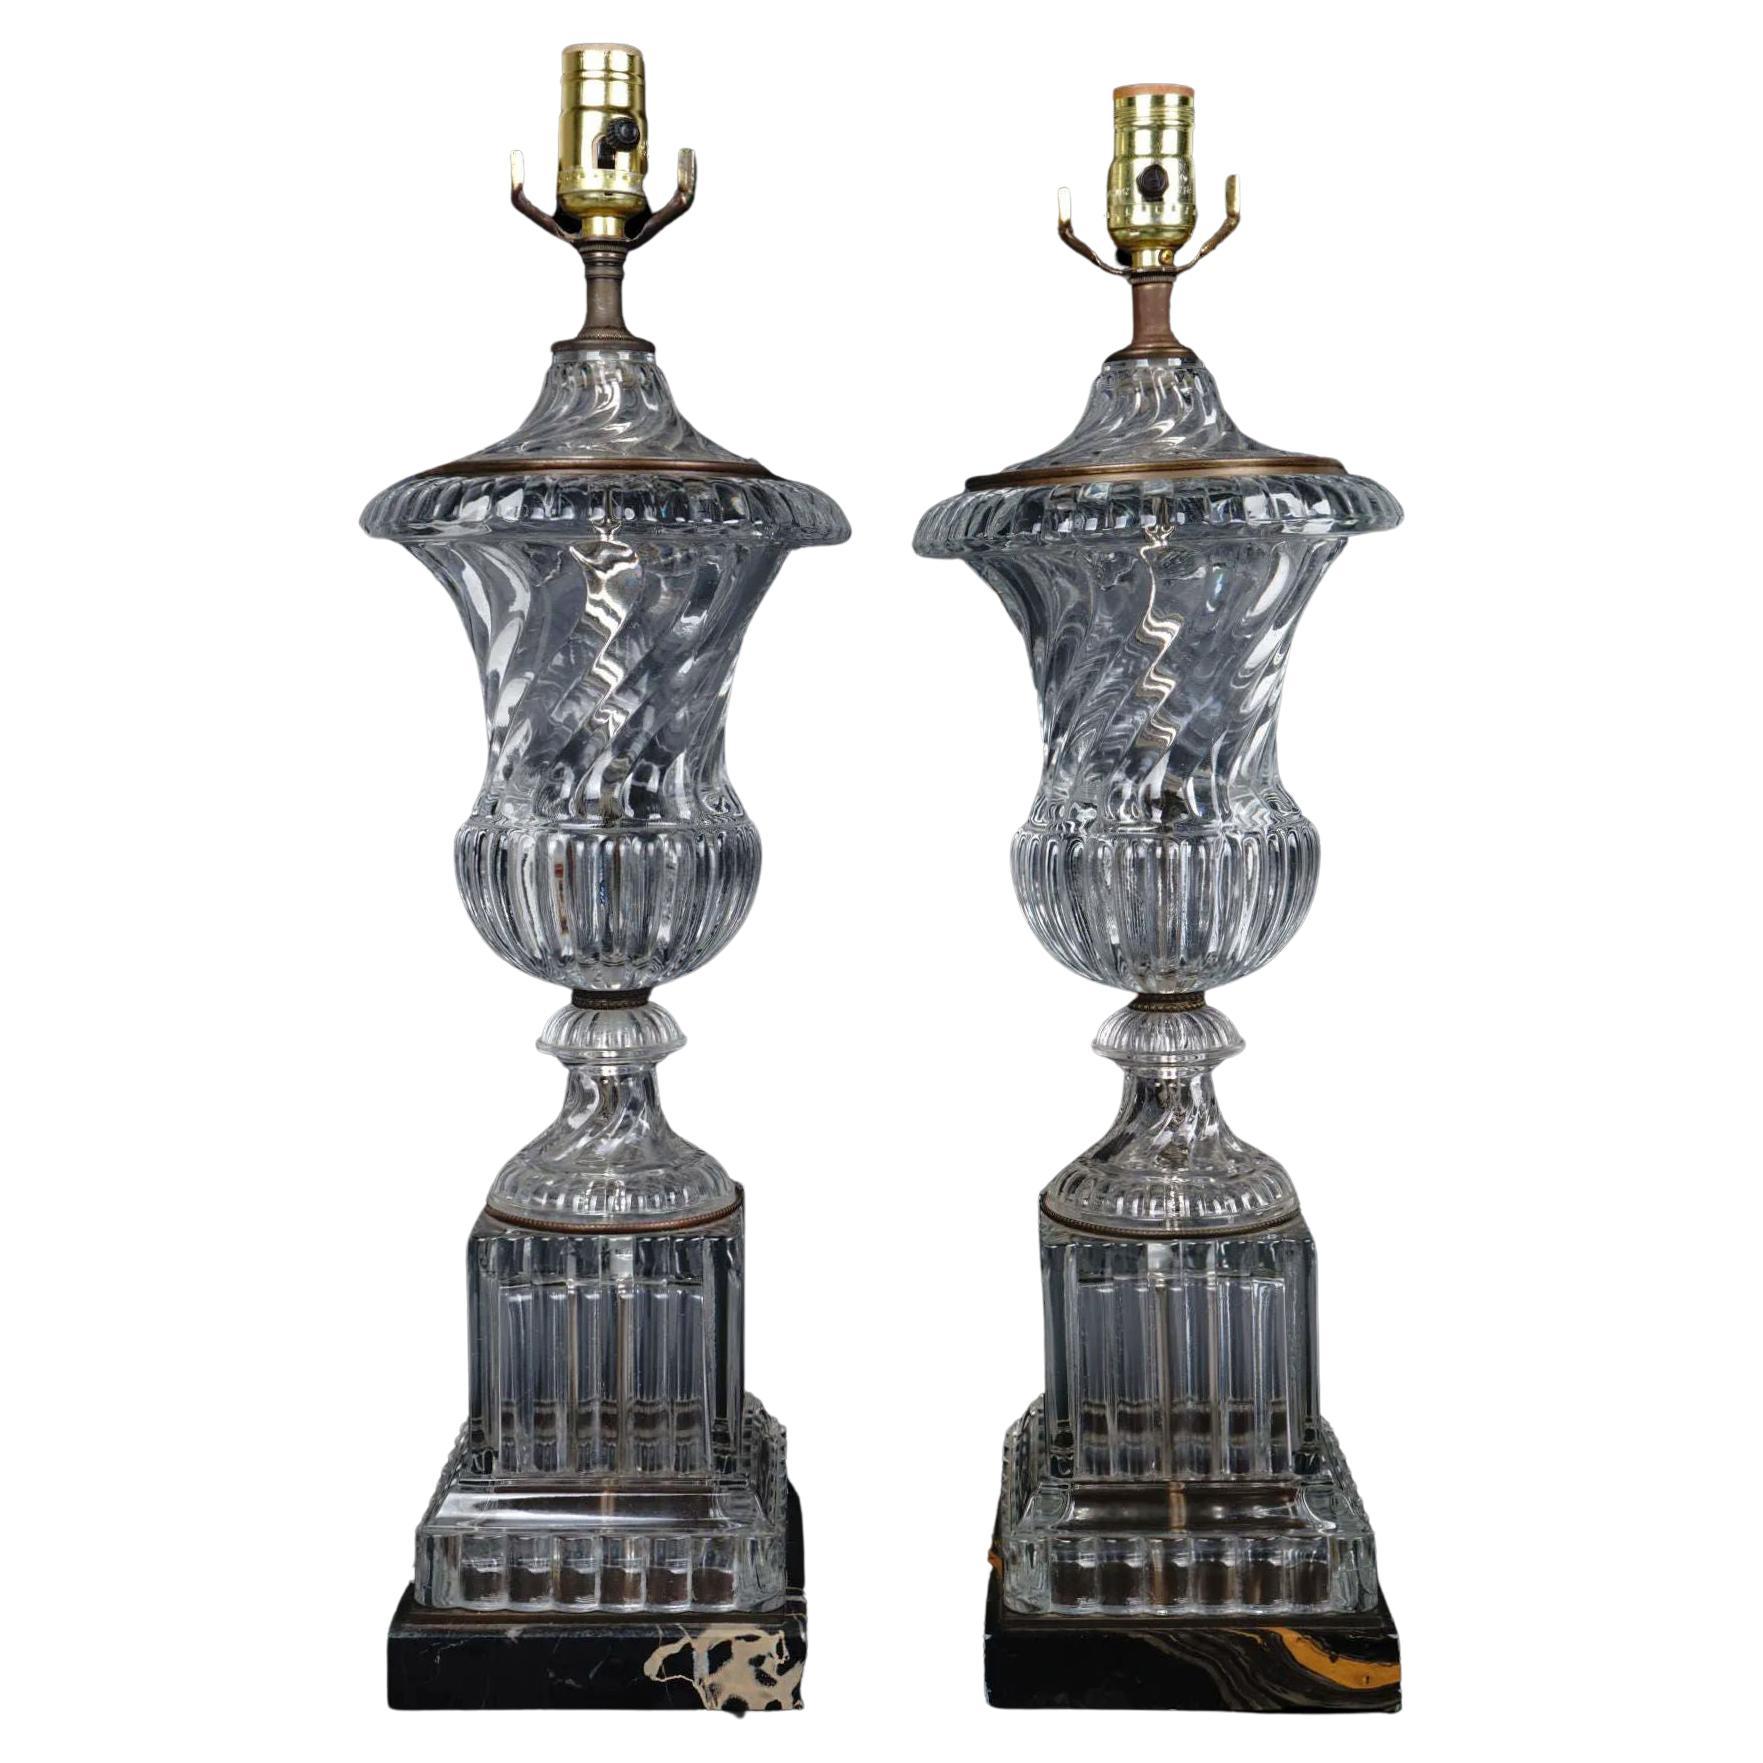 Pair of Baccarat style Molded Crystal and Marble Table Lamps